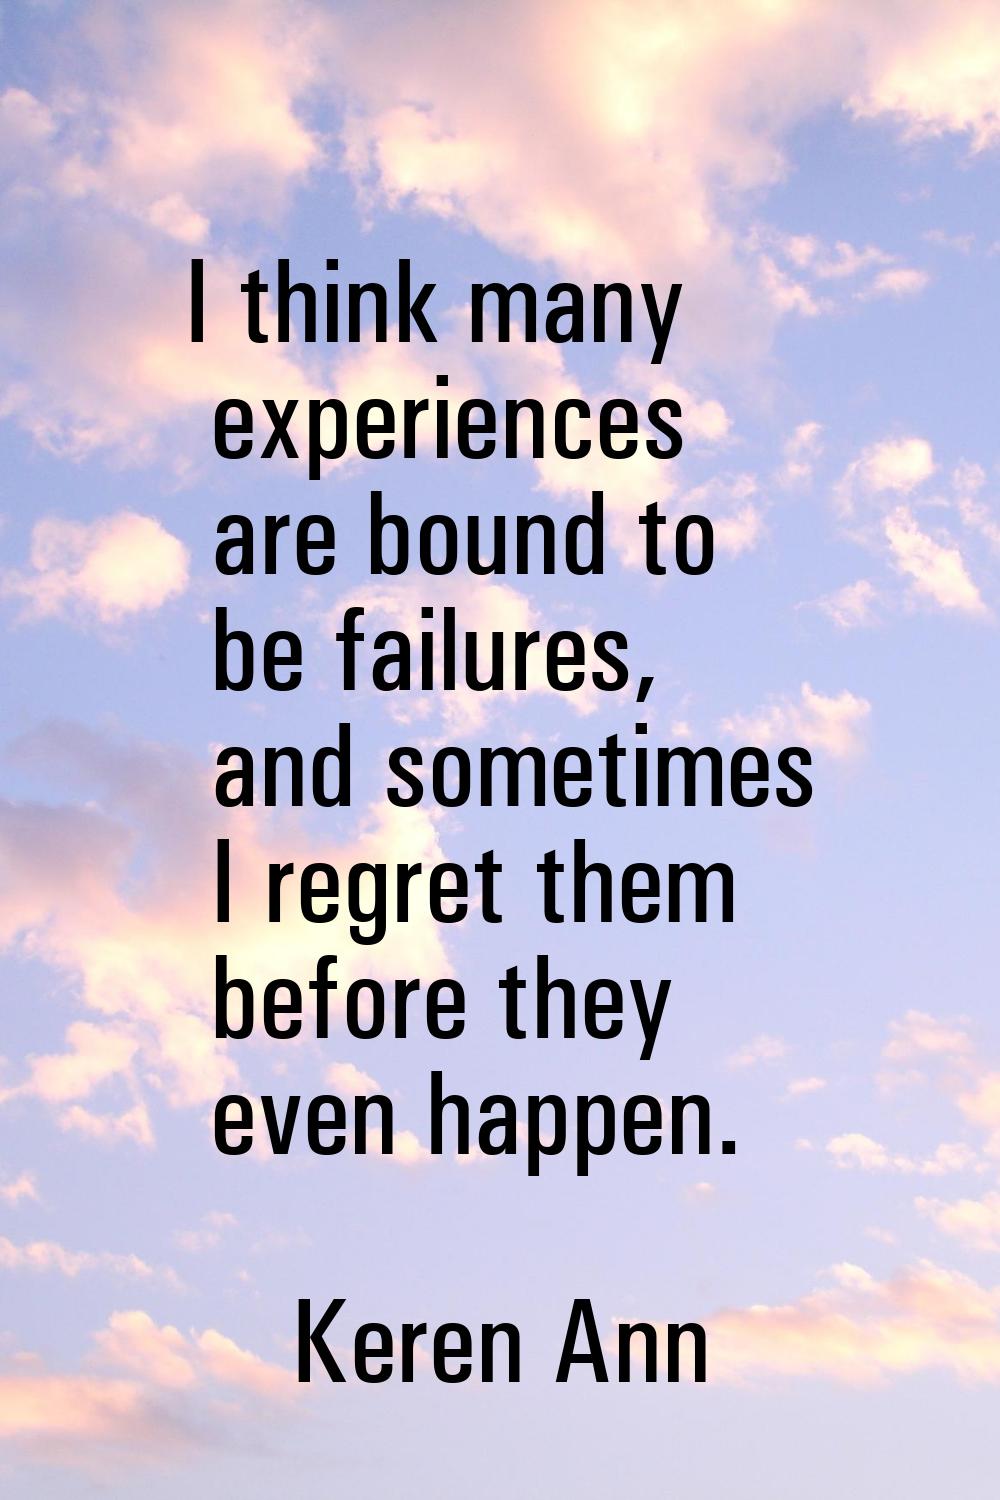 I think many experiences are bound to be failures, and sometimes I regret them before they even hap